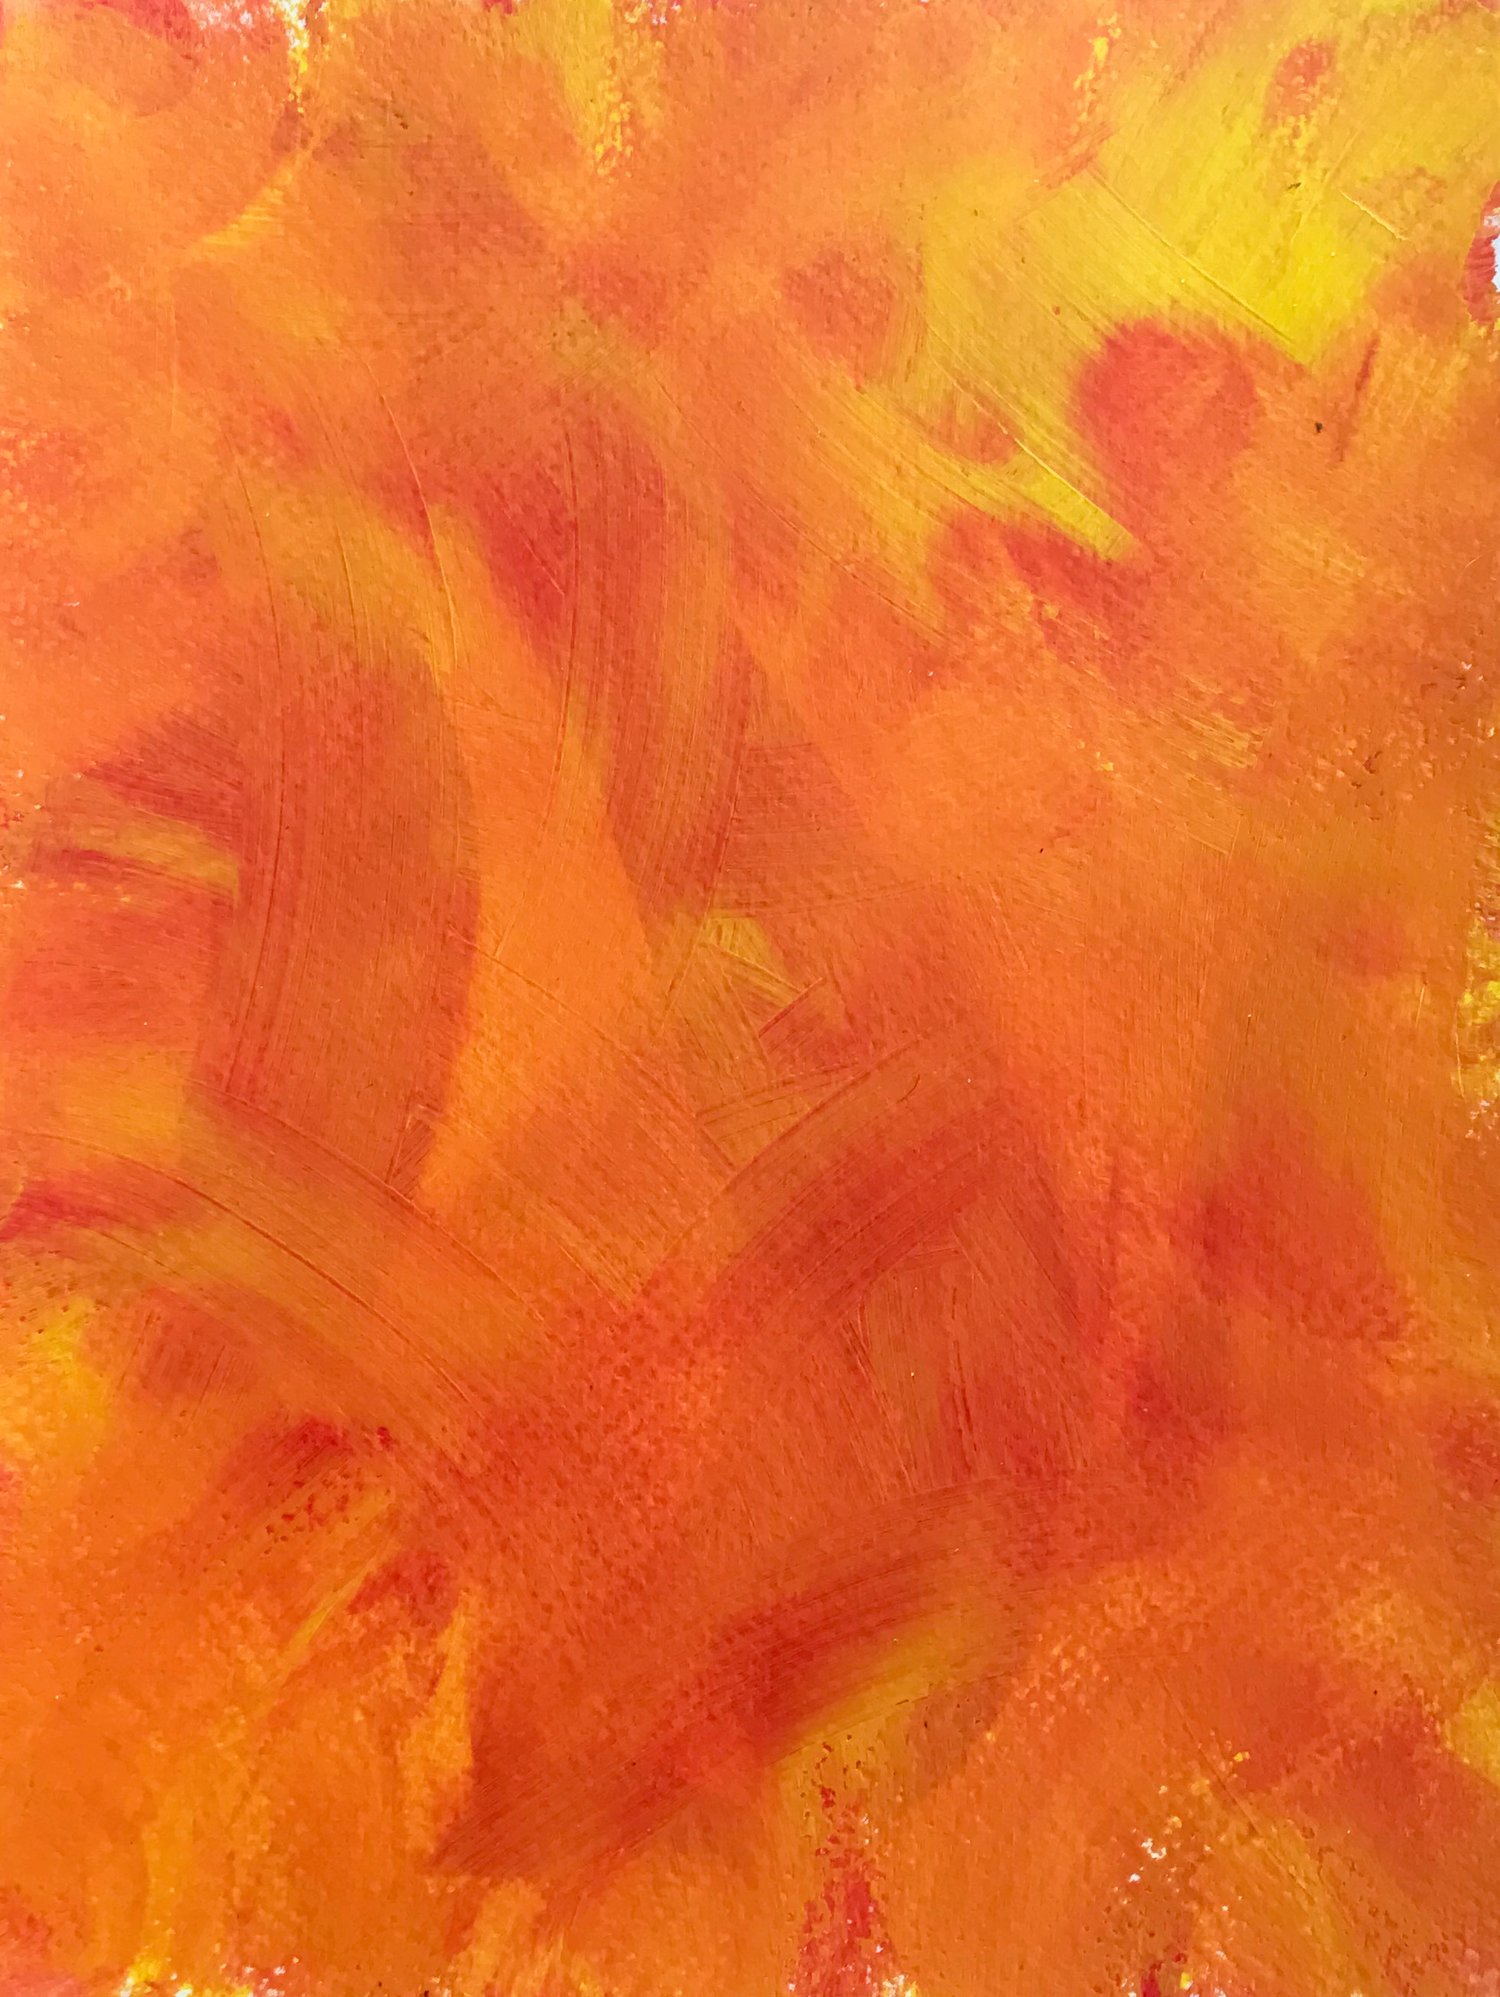 Order in the chaos - red and yellow colour study